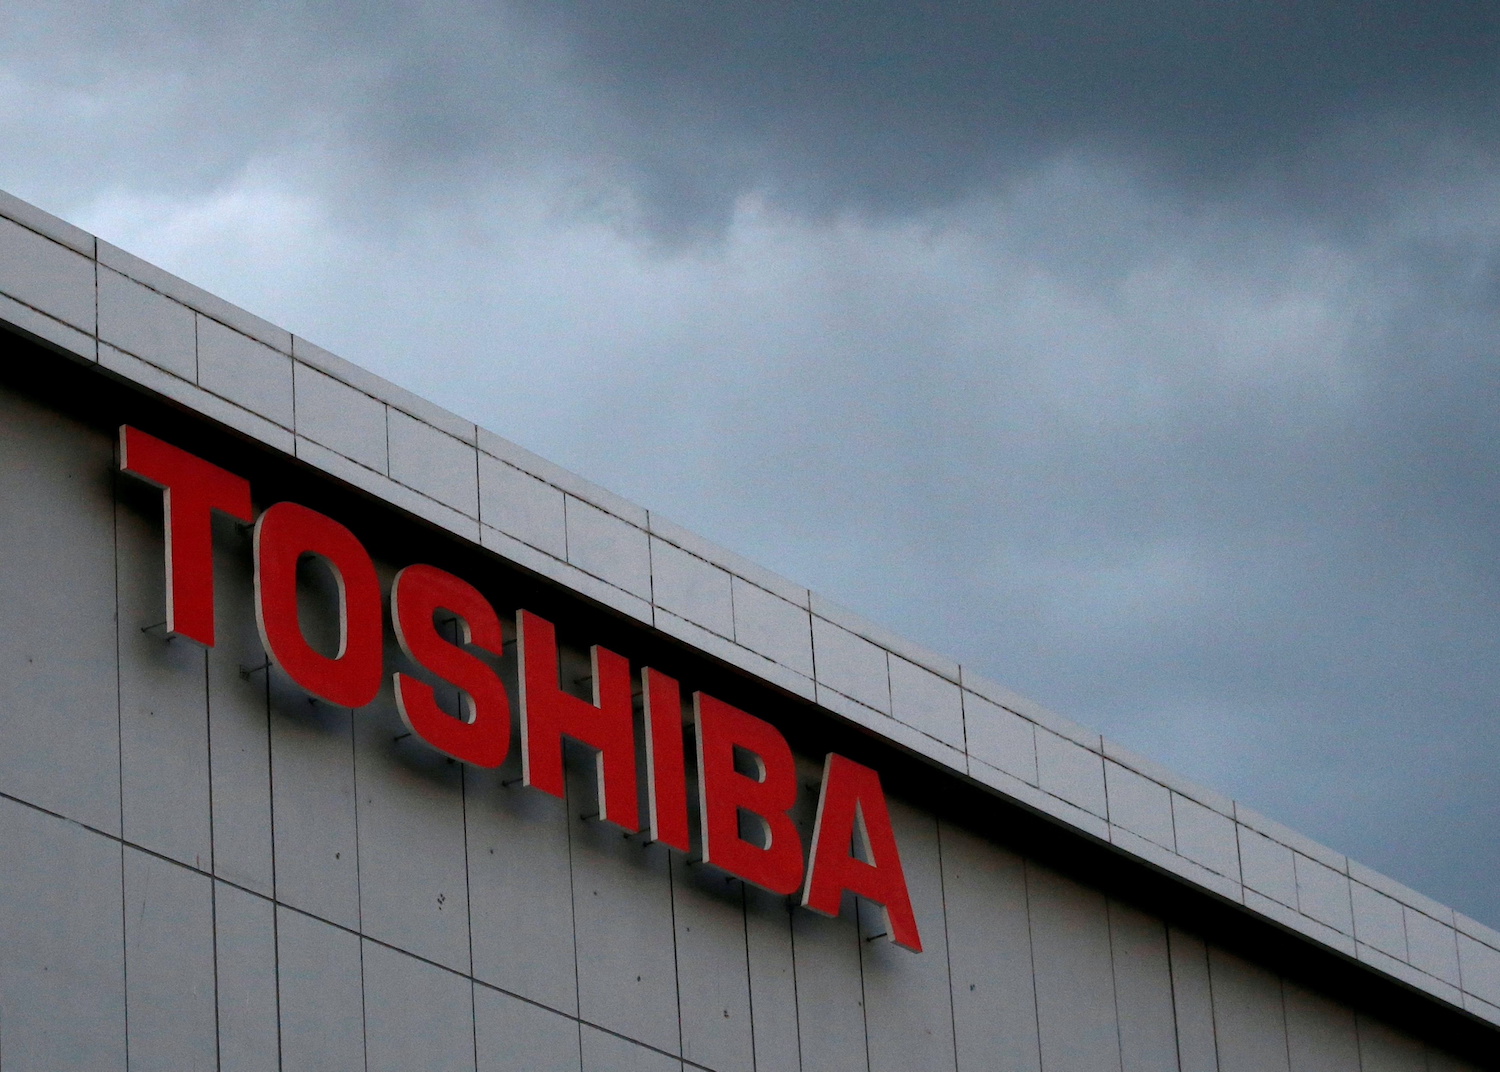 Toshiba office equipment unit hacked by DarkSide ransomware group